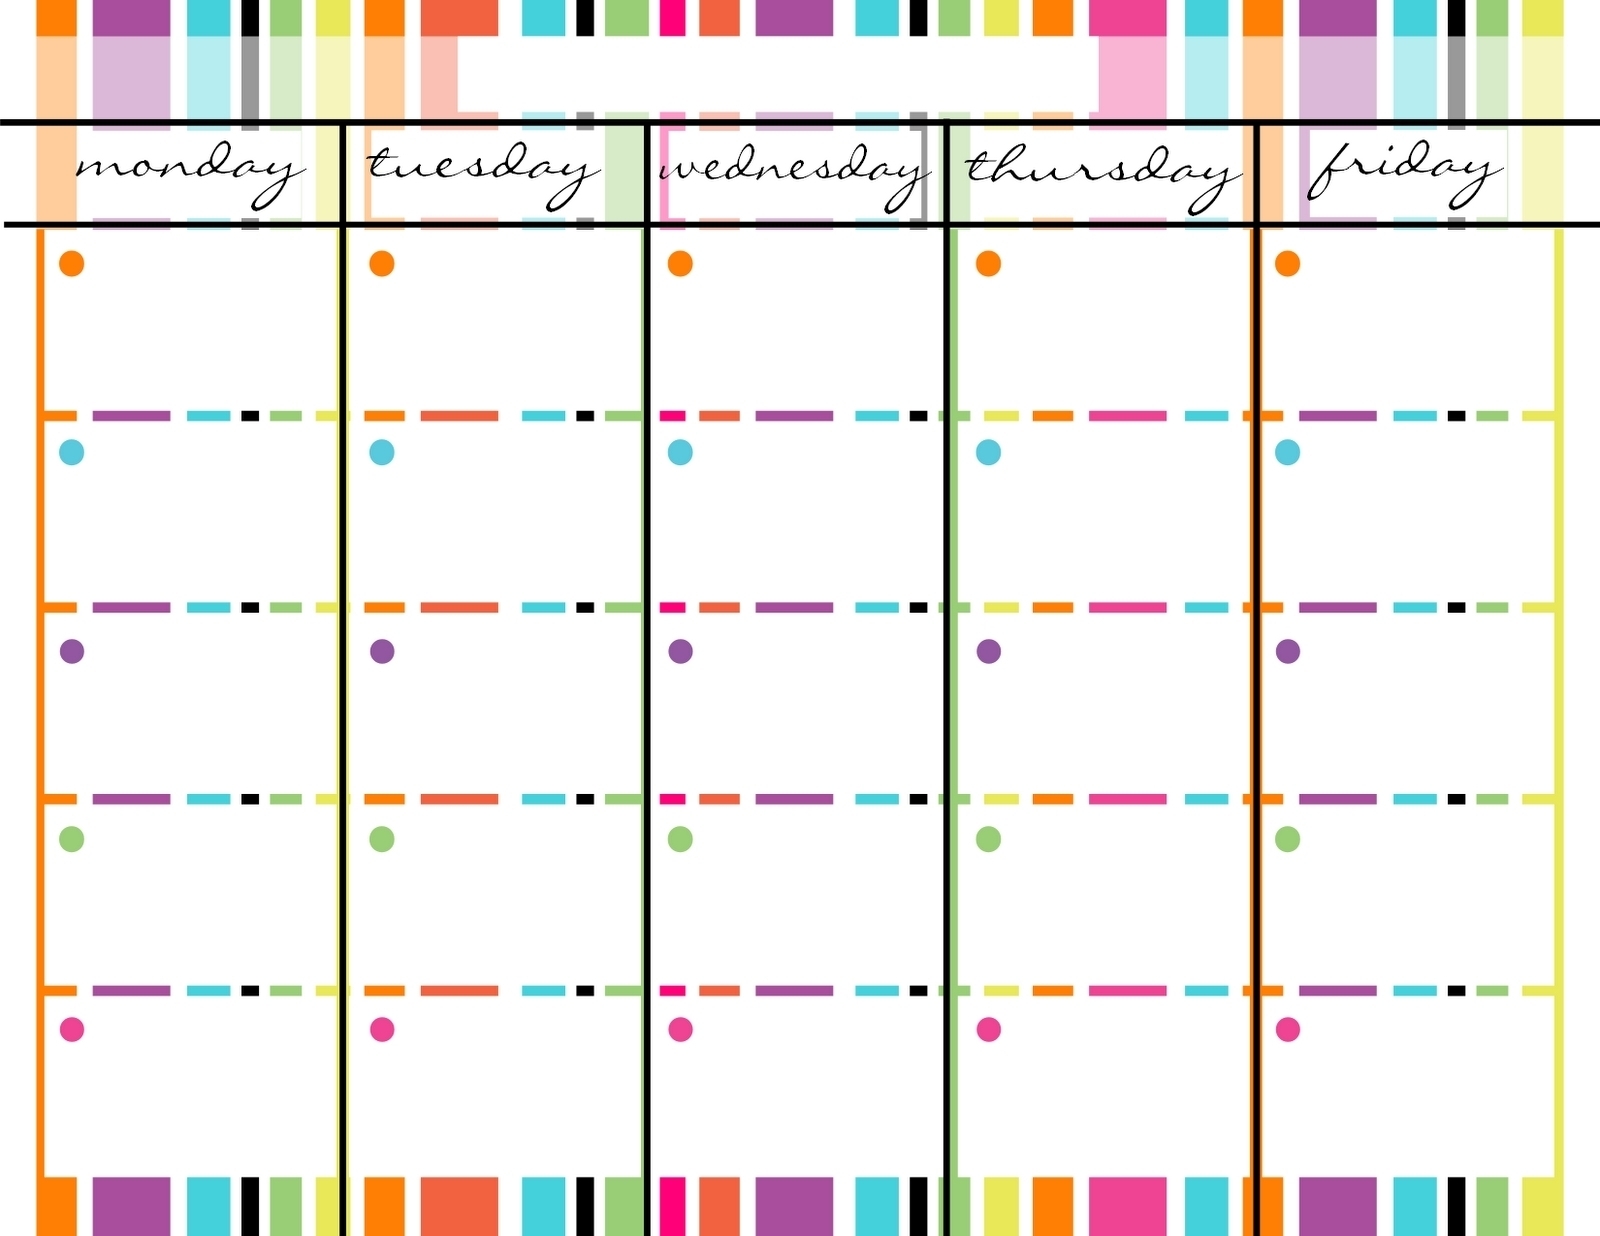 Schedule Template Weekly Blank Calendar Monday Through Iday Holidays pertaining to Monday Through Friday Blank Calendar Template